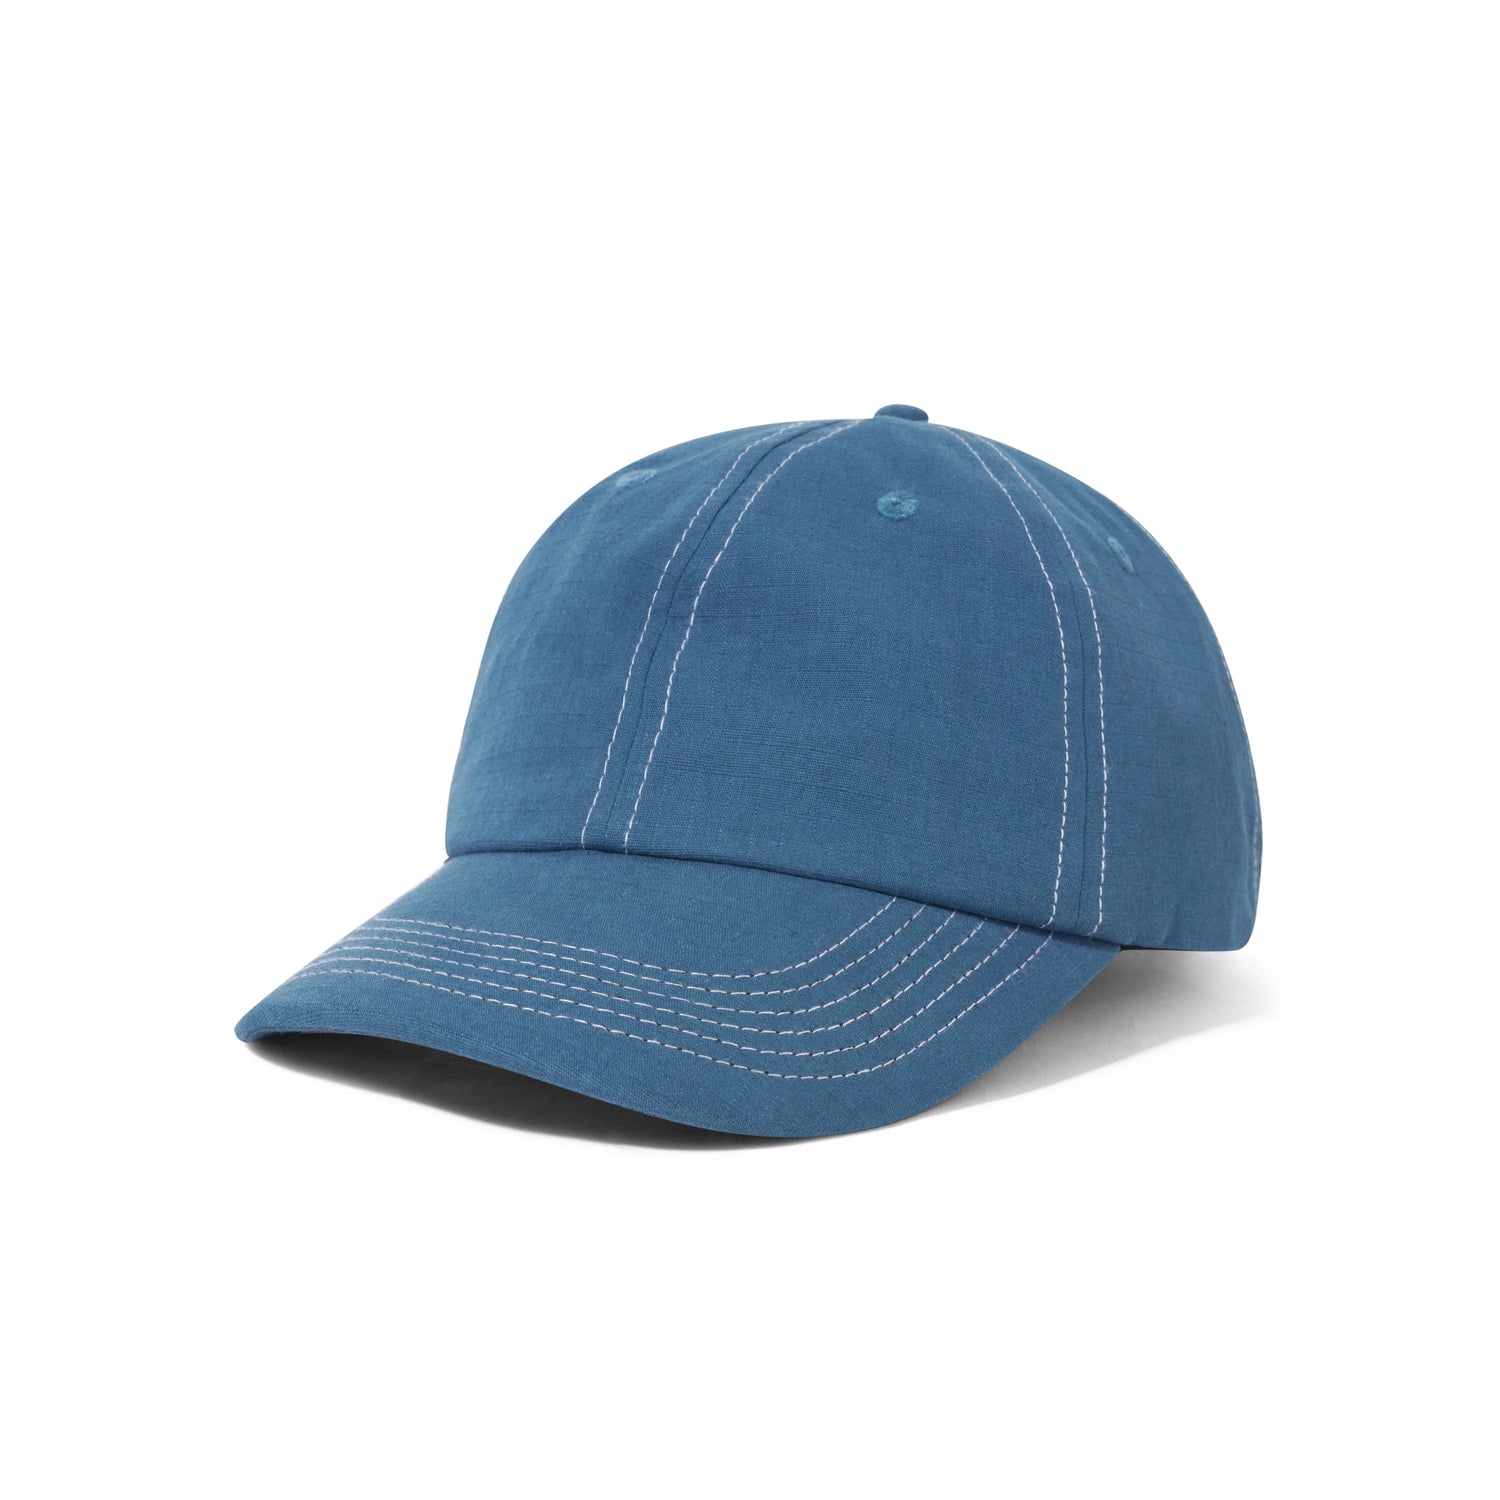 Washed Ripstop 6 Panel Cap, Navy